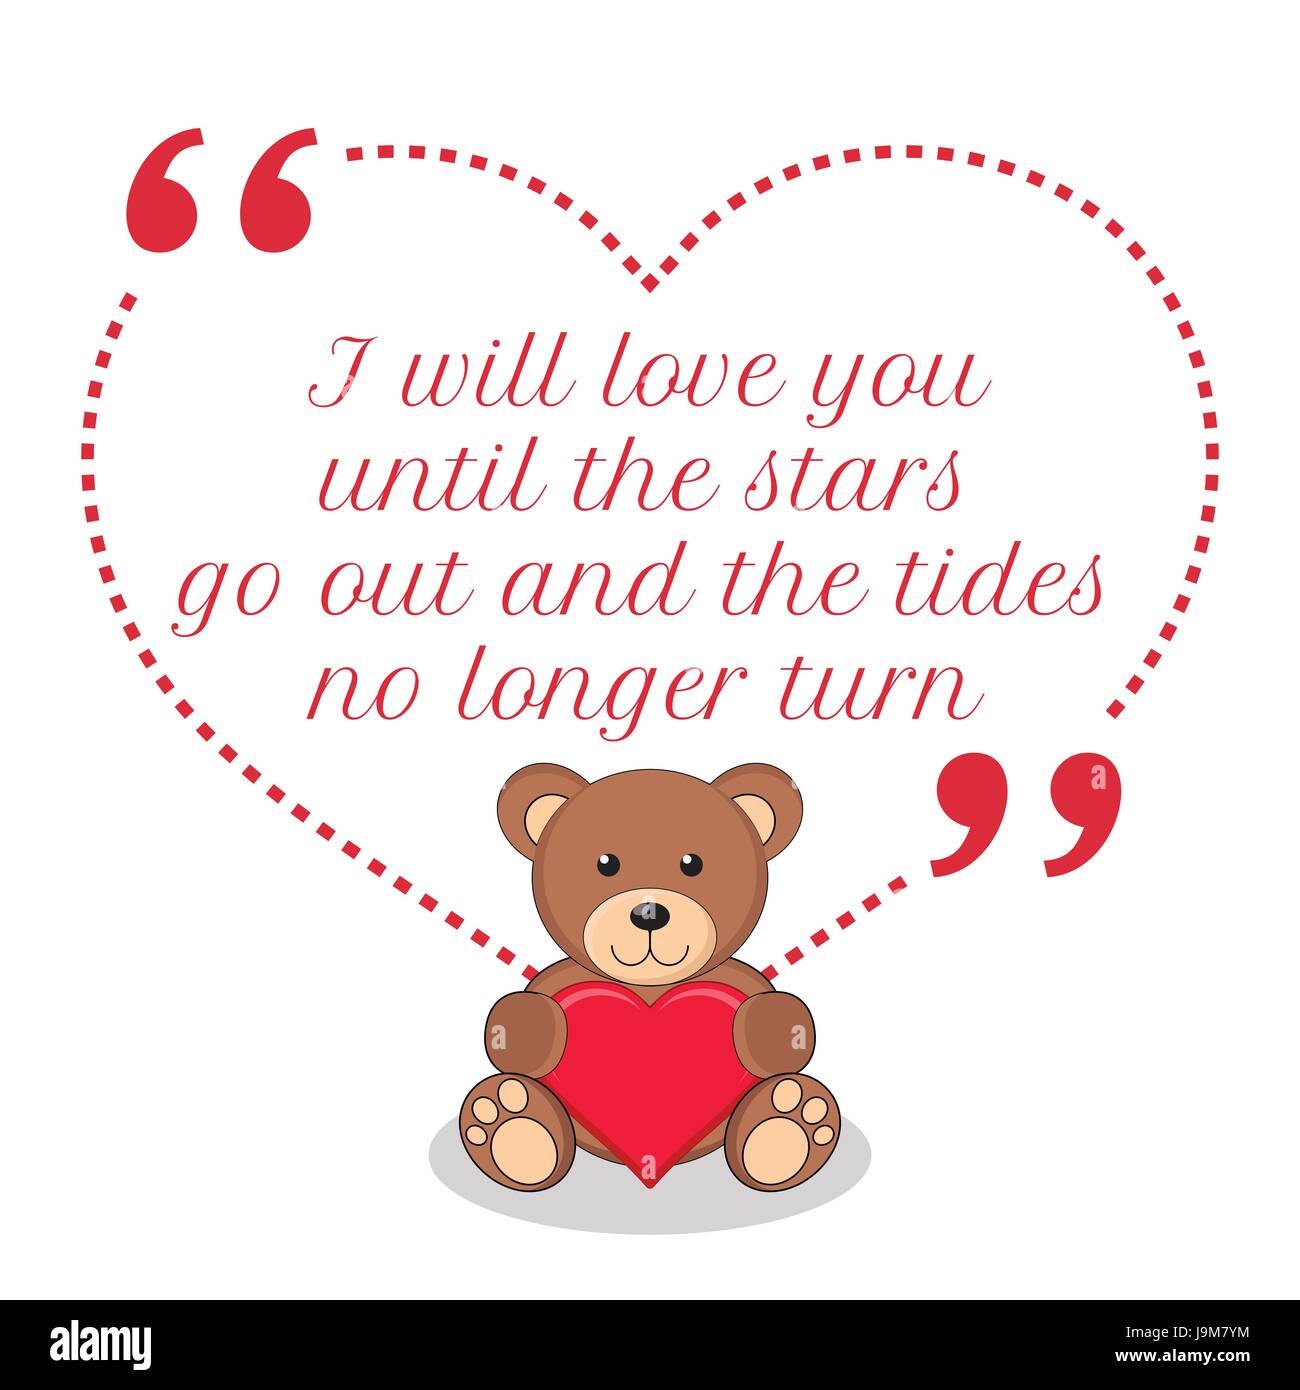 Inspirational love quote. I will love you until the stars go out and the tides no longer turn. Simple cute design. Stock Vector